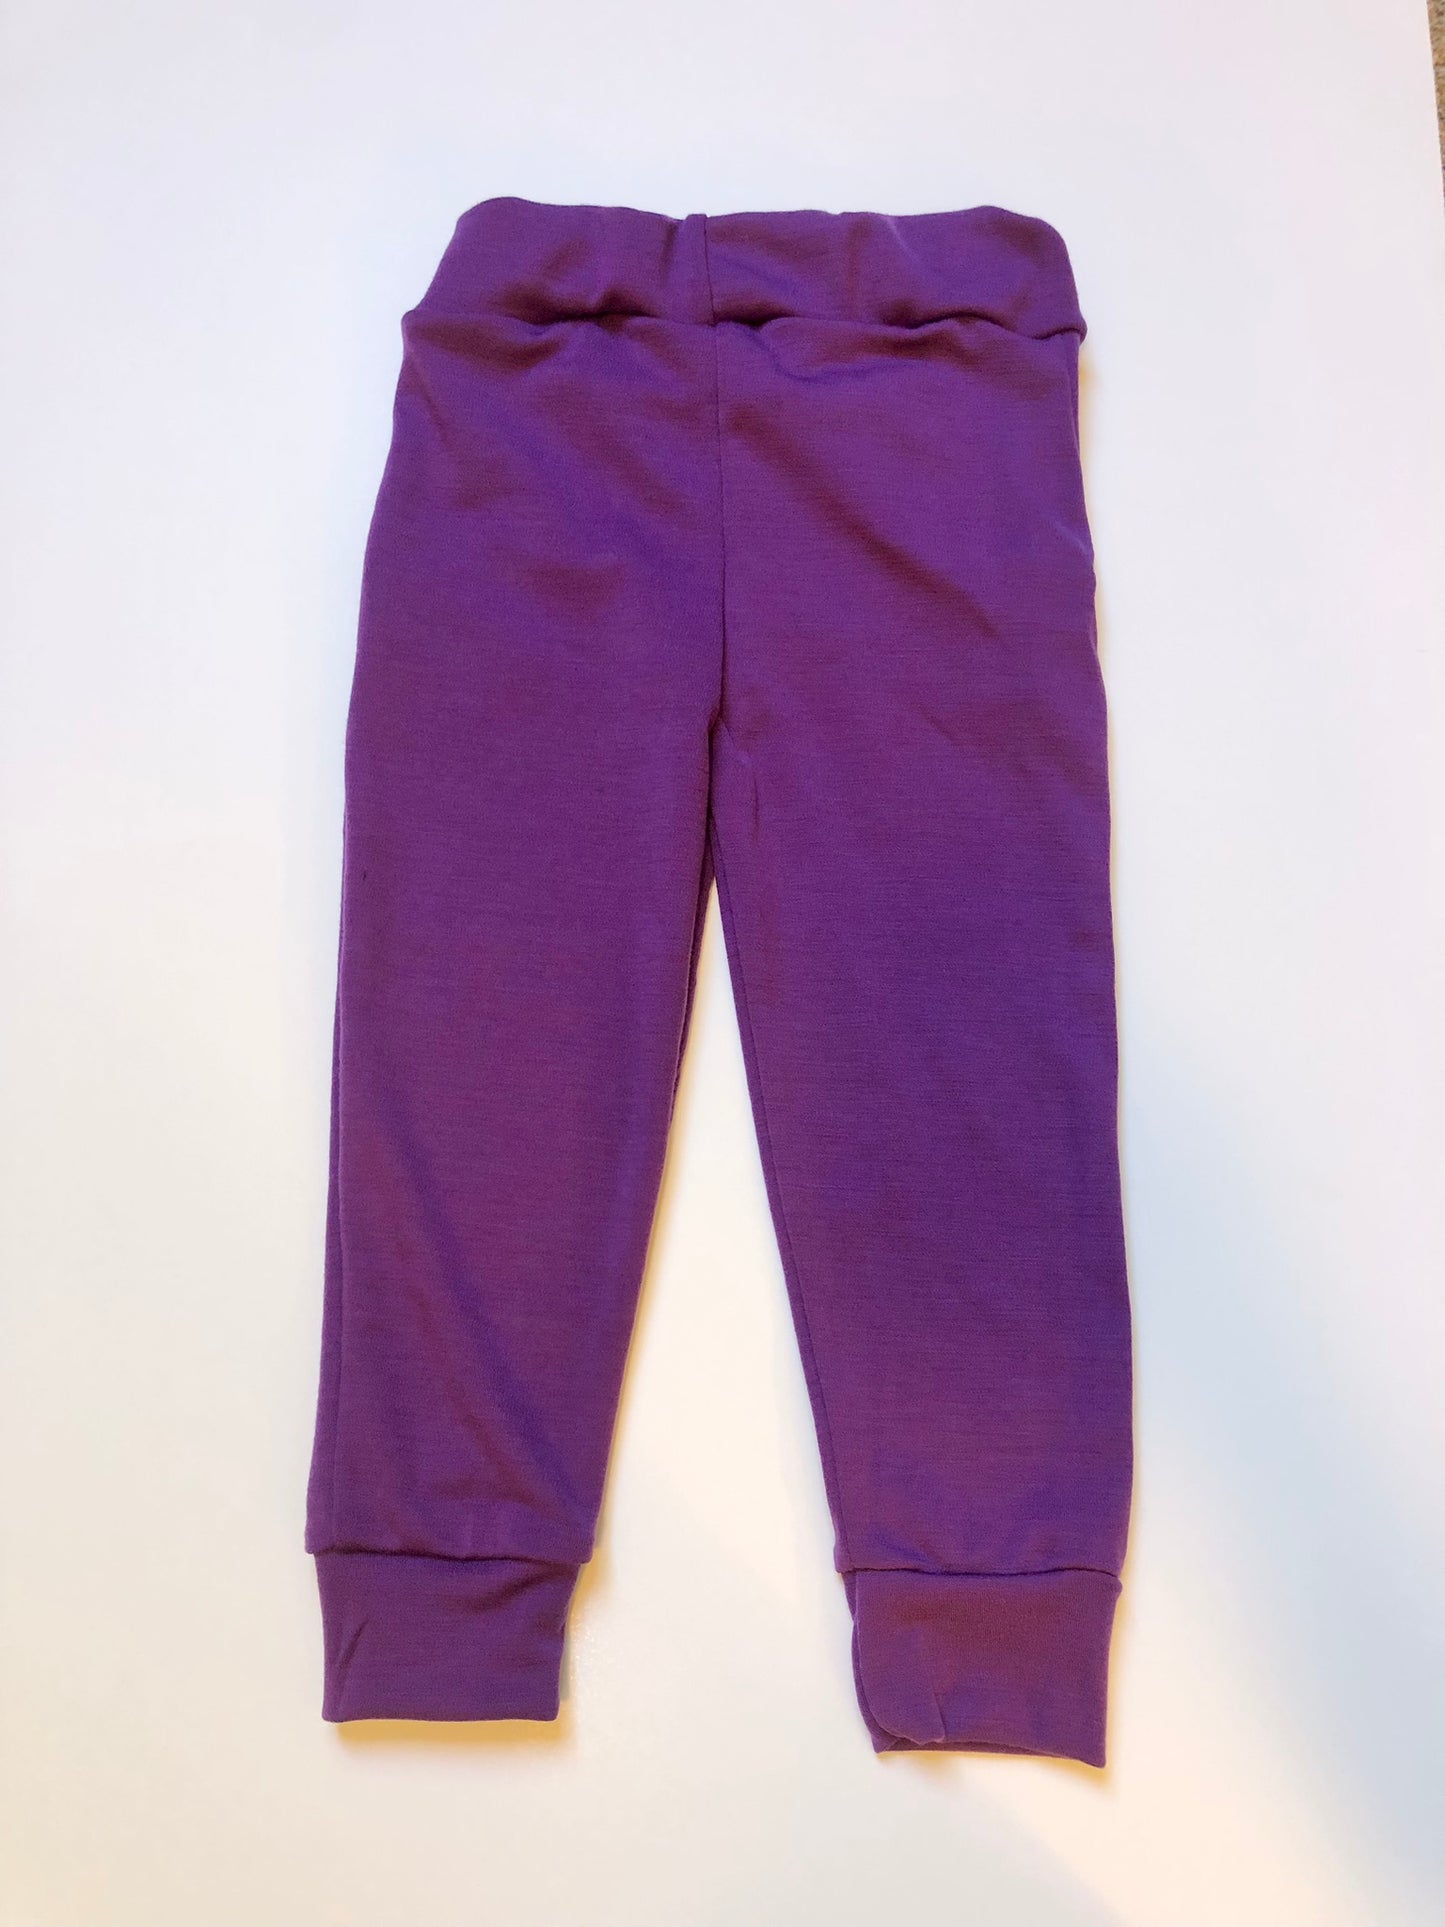 3T Kid's Wool Joggers - Ready to ship!